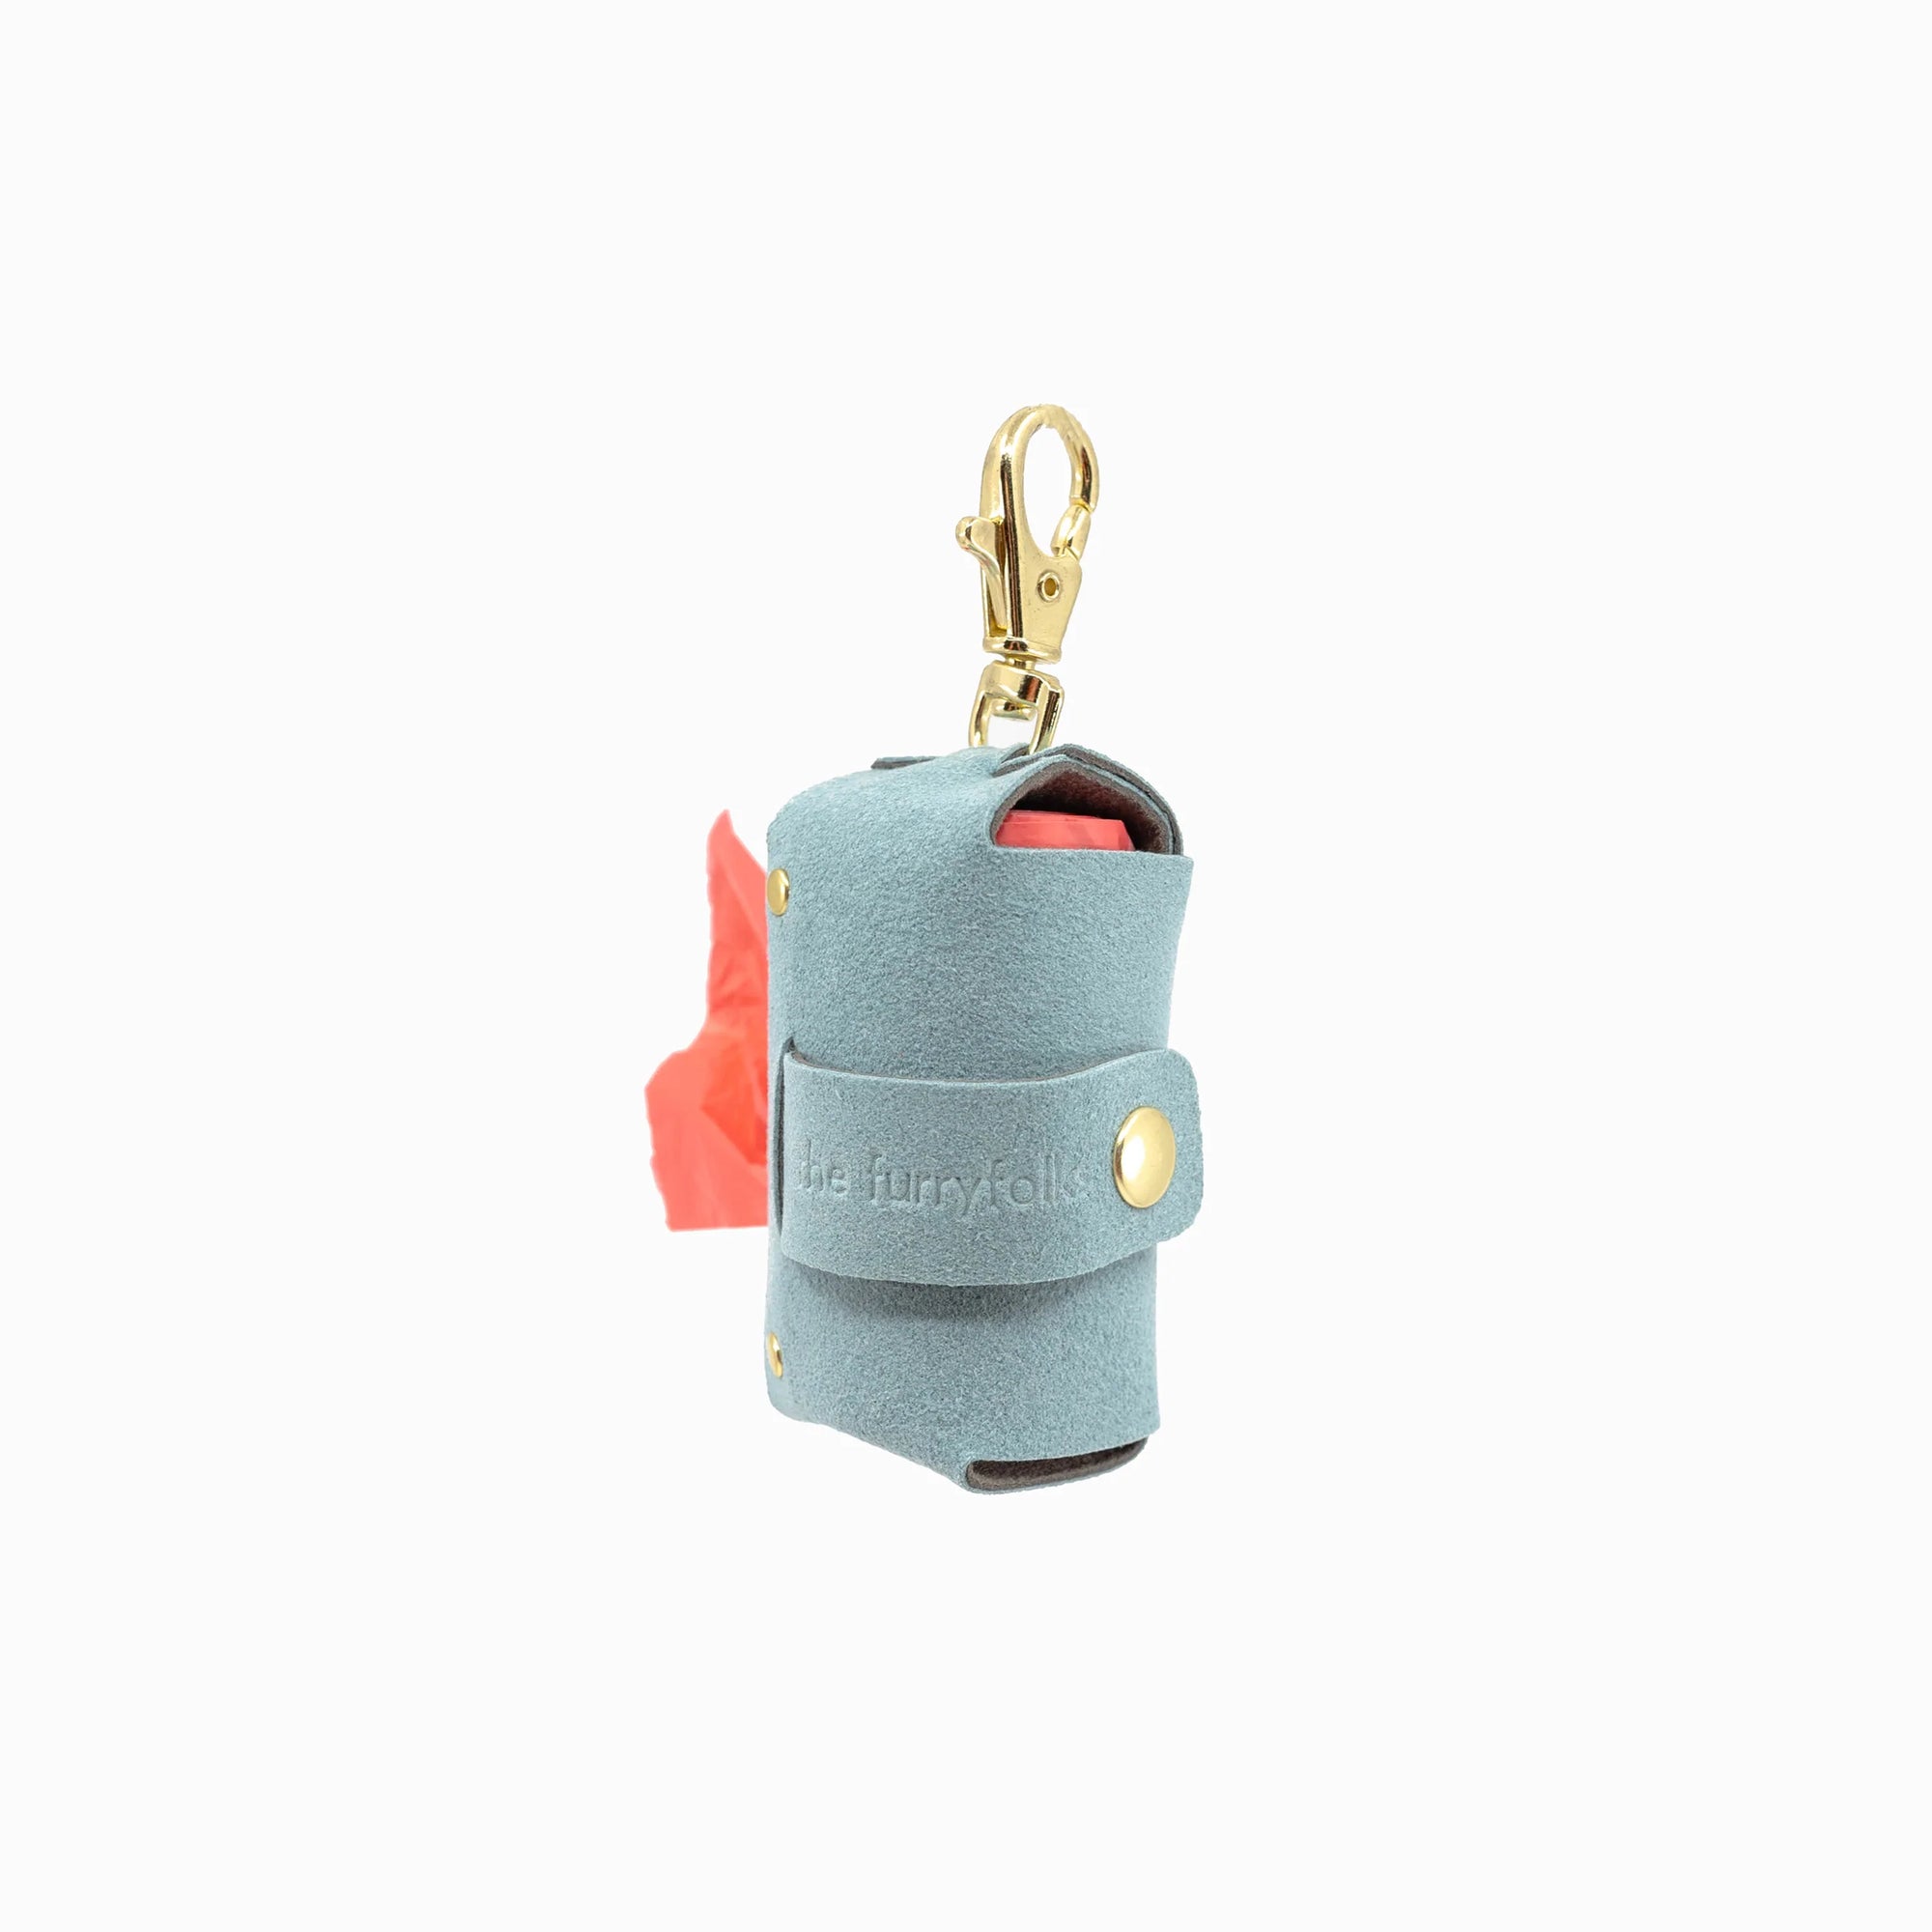 The image features a sky blue dog poop bag holder with a roll of red bags slightly visible, equipped with a gold clip for attachment. It's marked with "the furryfolks" branding, designed for convenience during dog walks.